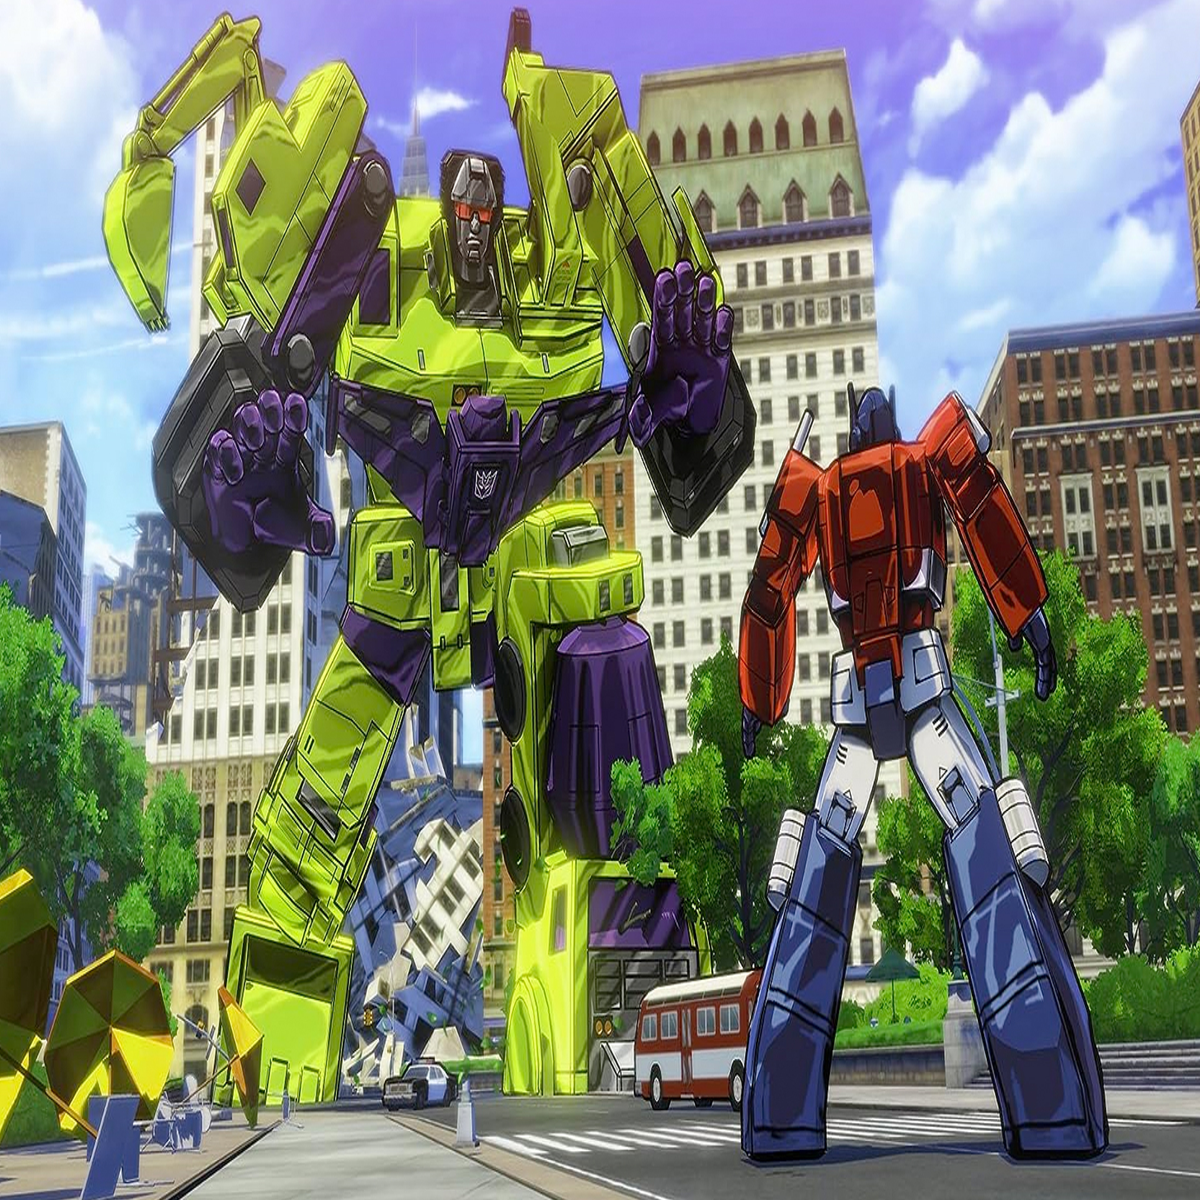 Transformers: The Game PlayStation 3 Review - Video Review 